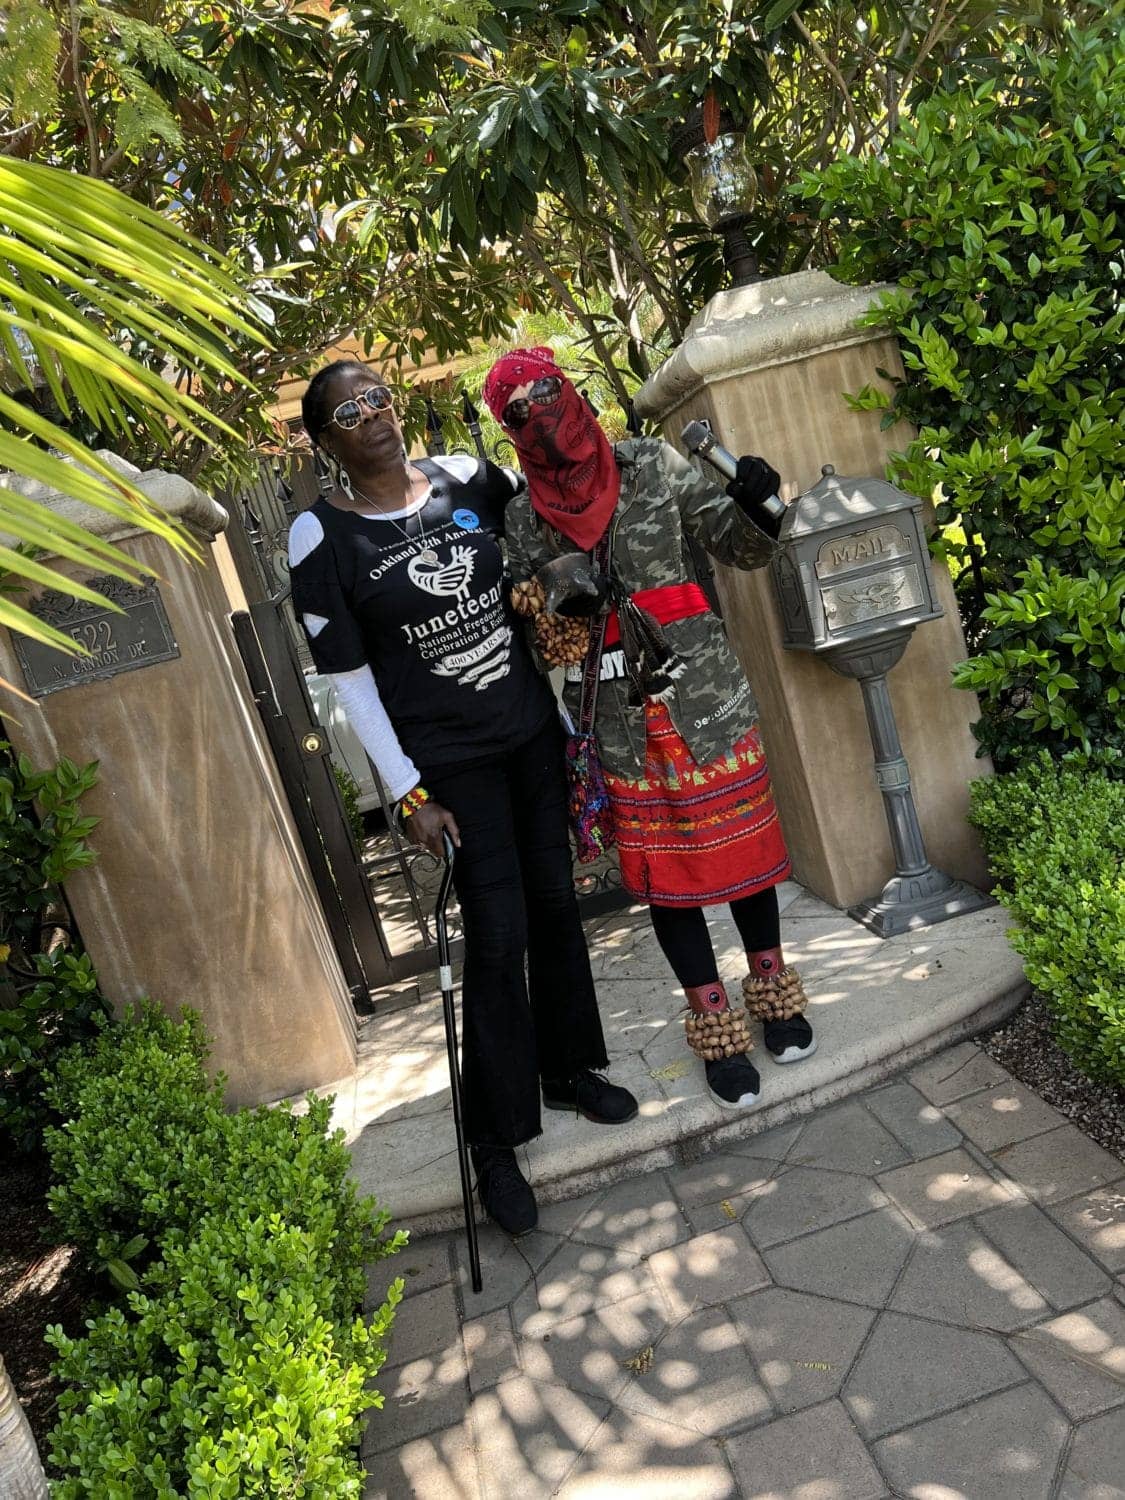 Tiny-Aunti-Frances-Moore-on-UnTour-of-Stolen-Land-Resources-share-the-medicine-of-the-Bank-of-ComeUnity-Reparations-with-wealth-hoarders-in-Beverly-Hills, Shoplifting on stolen land: debt-lying, surviving and dying from hunger, Featured News & Views 